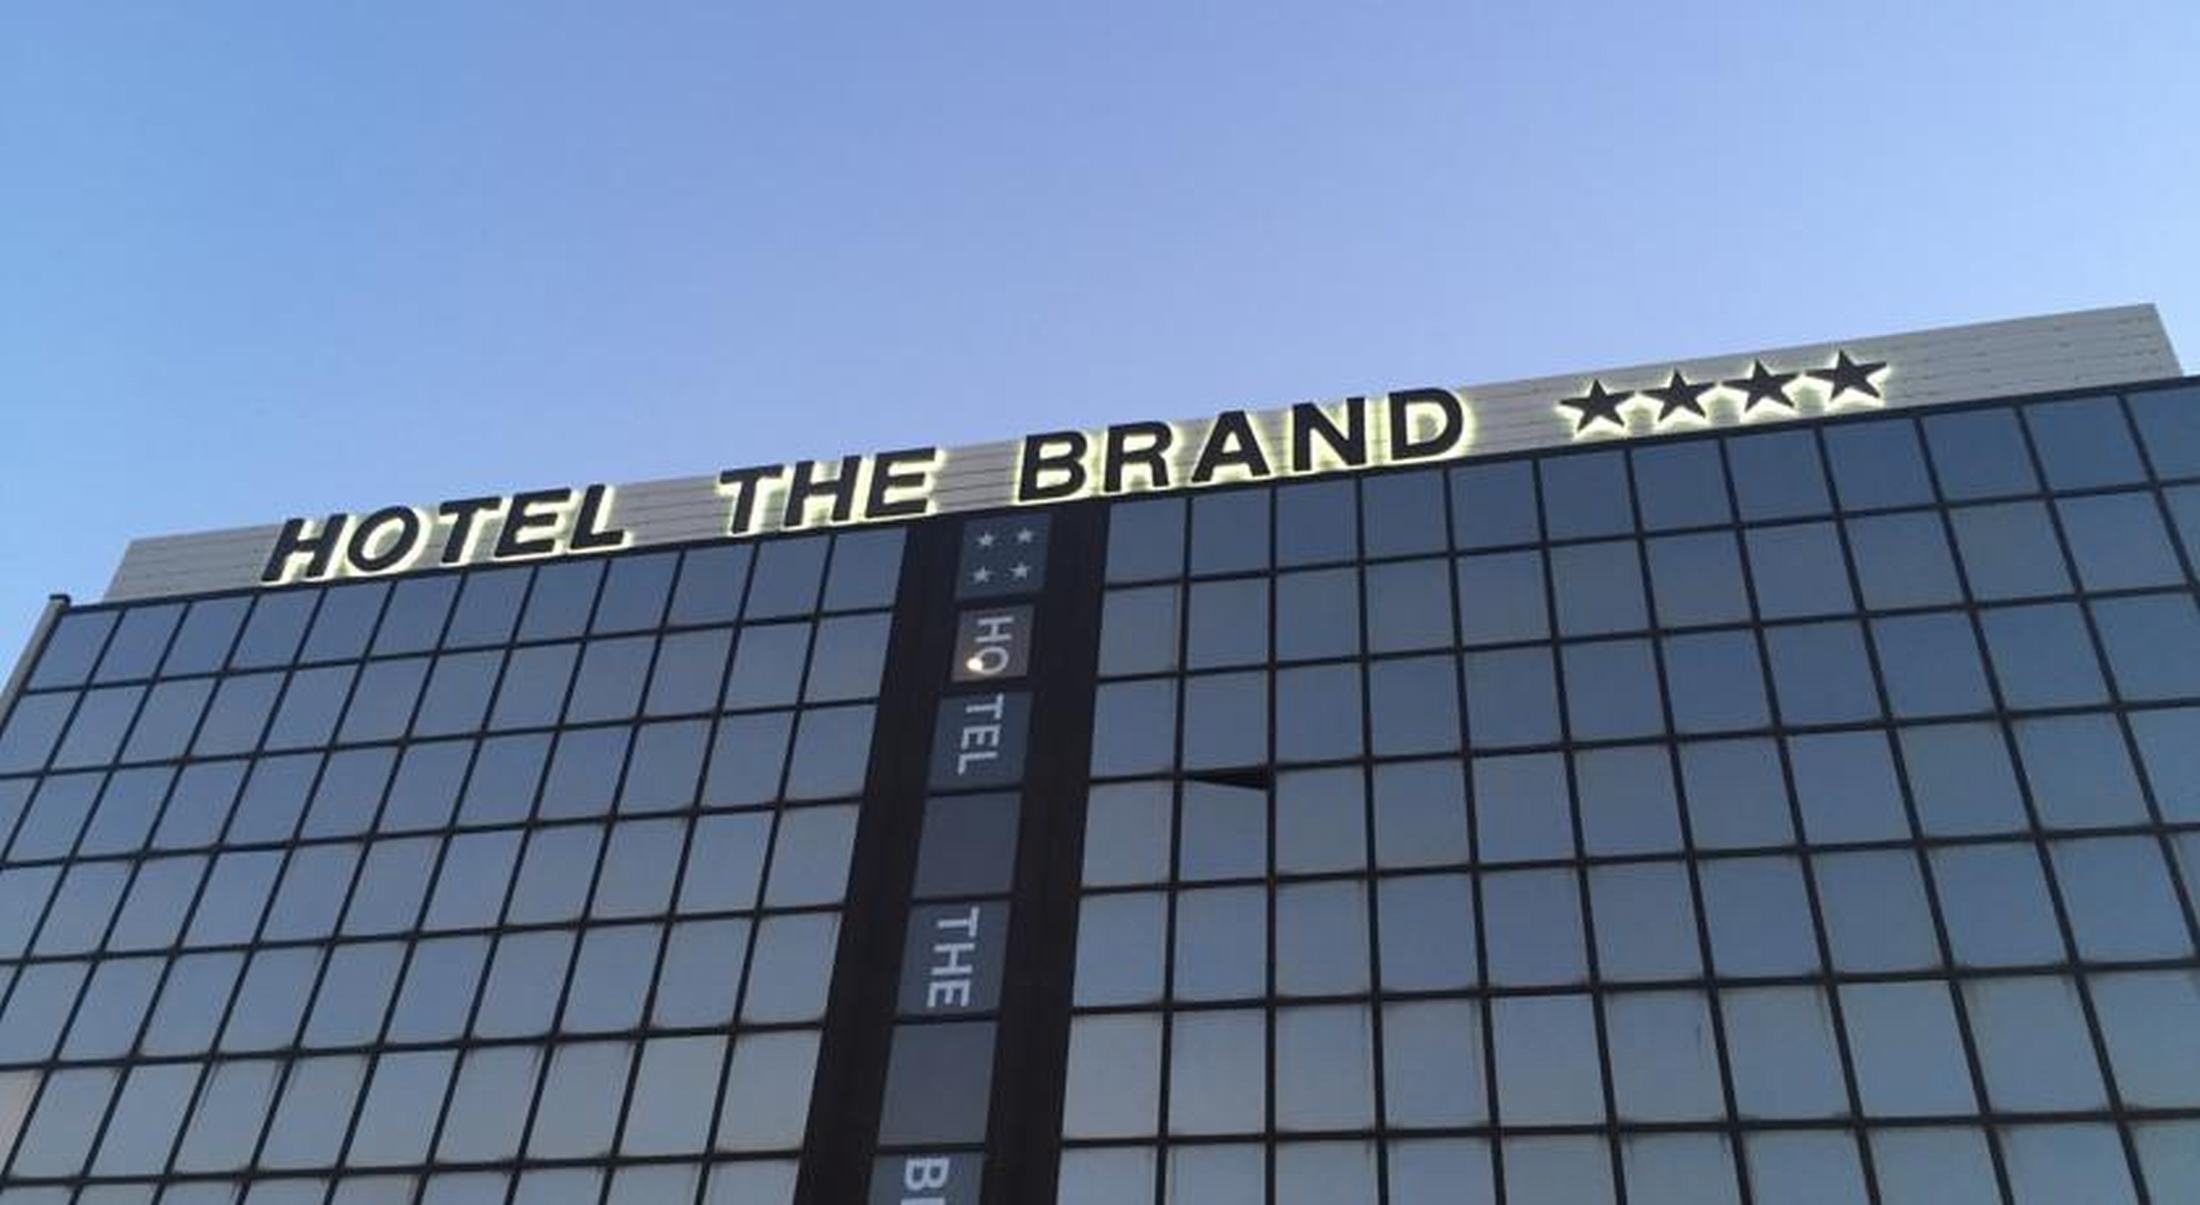 Hotel The Brand image